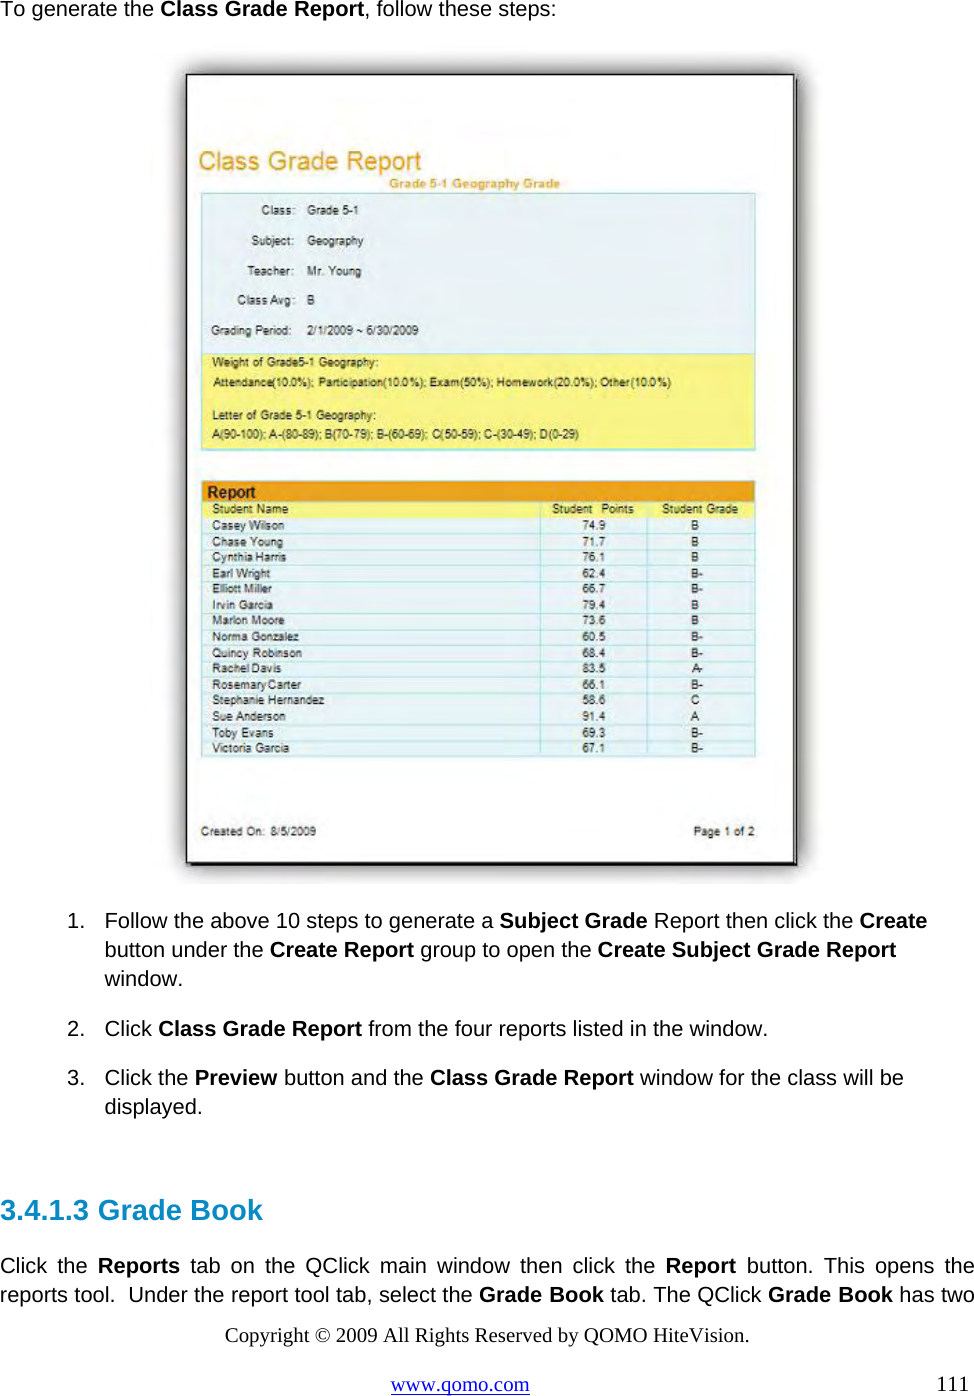 Copyright © 2009 All Rights Reserved by QOMO HiteVision. www.qomo.com                                                                          111  To generate the Class Grade Report, follow these steps:  1.  Follow the above 10 steps to generate a Subject Grade Report then click the Create button under the Create Report group to open the Create Subject Grade Report window. 2. Click Class Grade Report from the four reports listed in the window. 3. Click the Preview button and the Class Grade Report window for the class will be displayed.  3.4.1.3  Grade Book Click the Reports tab on the QClick main window then click the Report  button. This opens the reports tool.  Under the report tool tab, select the Grade Book tab. The QClick Grade Book has two 